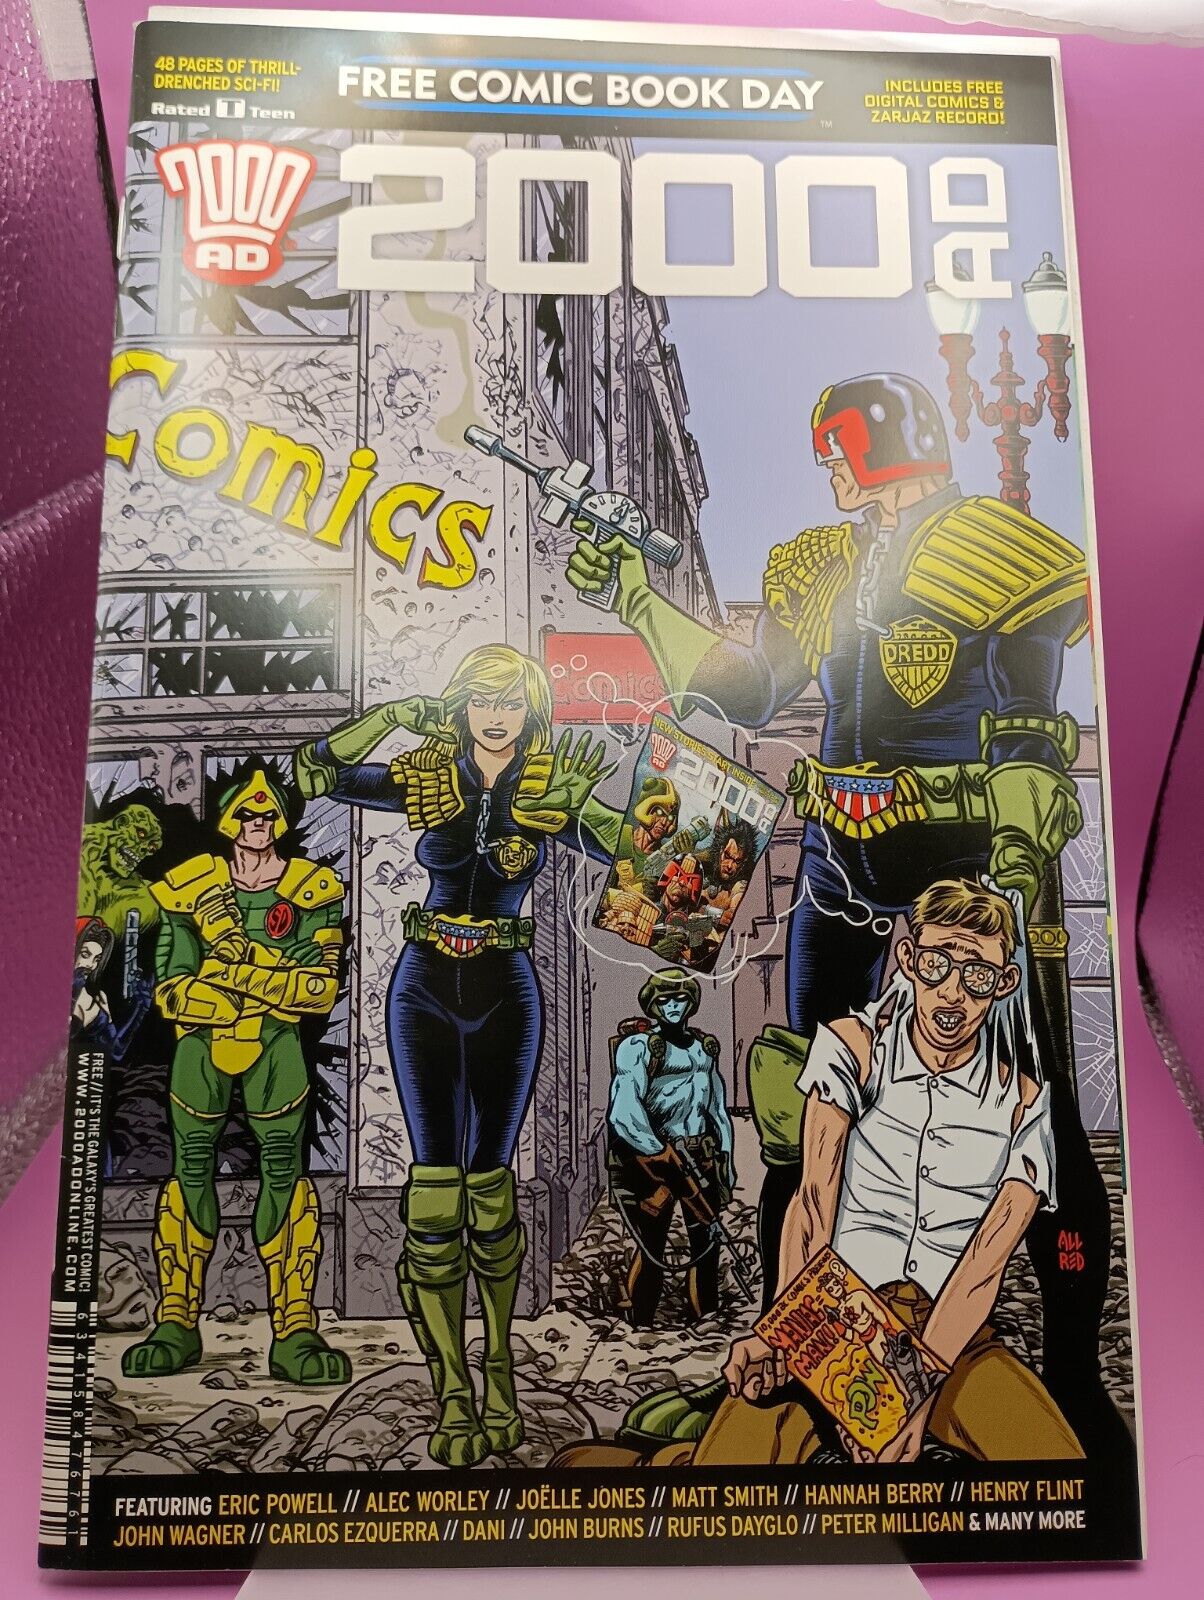 UNSTAMPED 2016 FCBD 2000 AD Promotional Giveaway Comic Book 